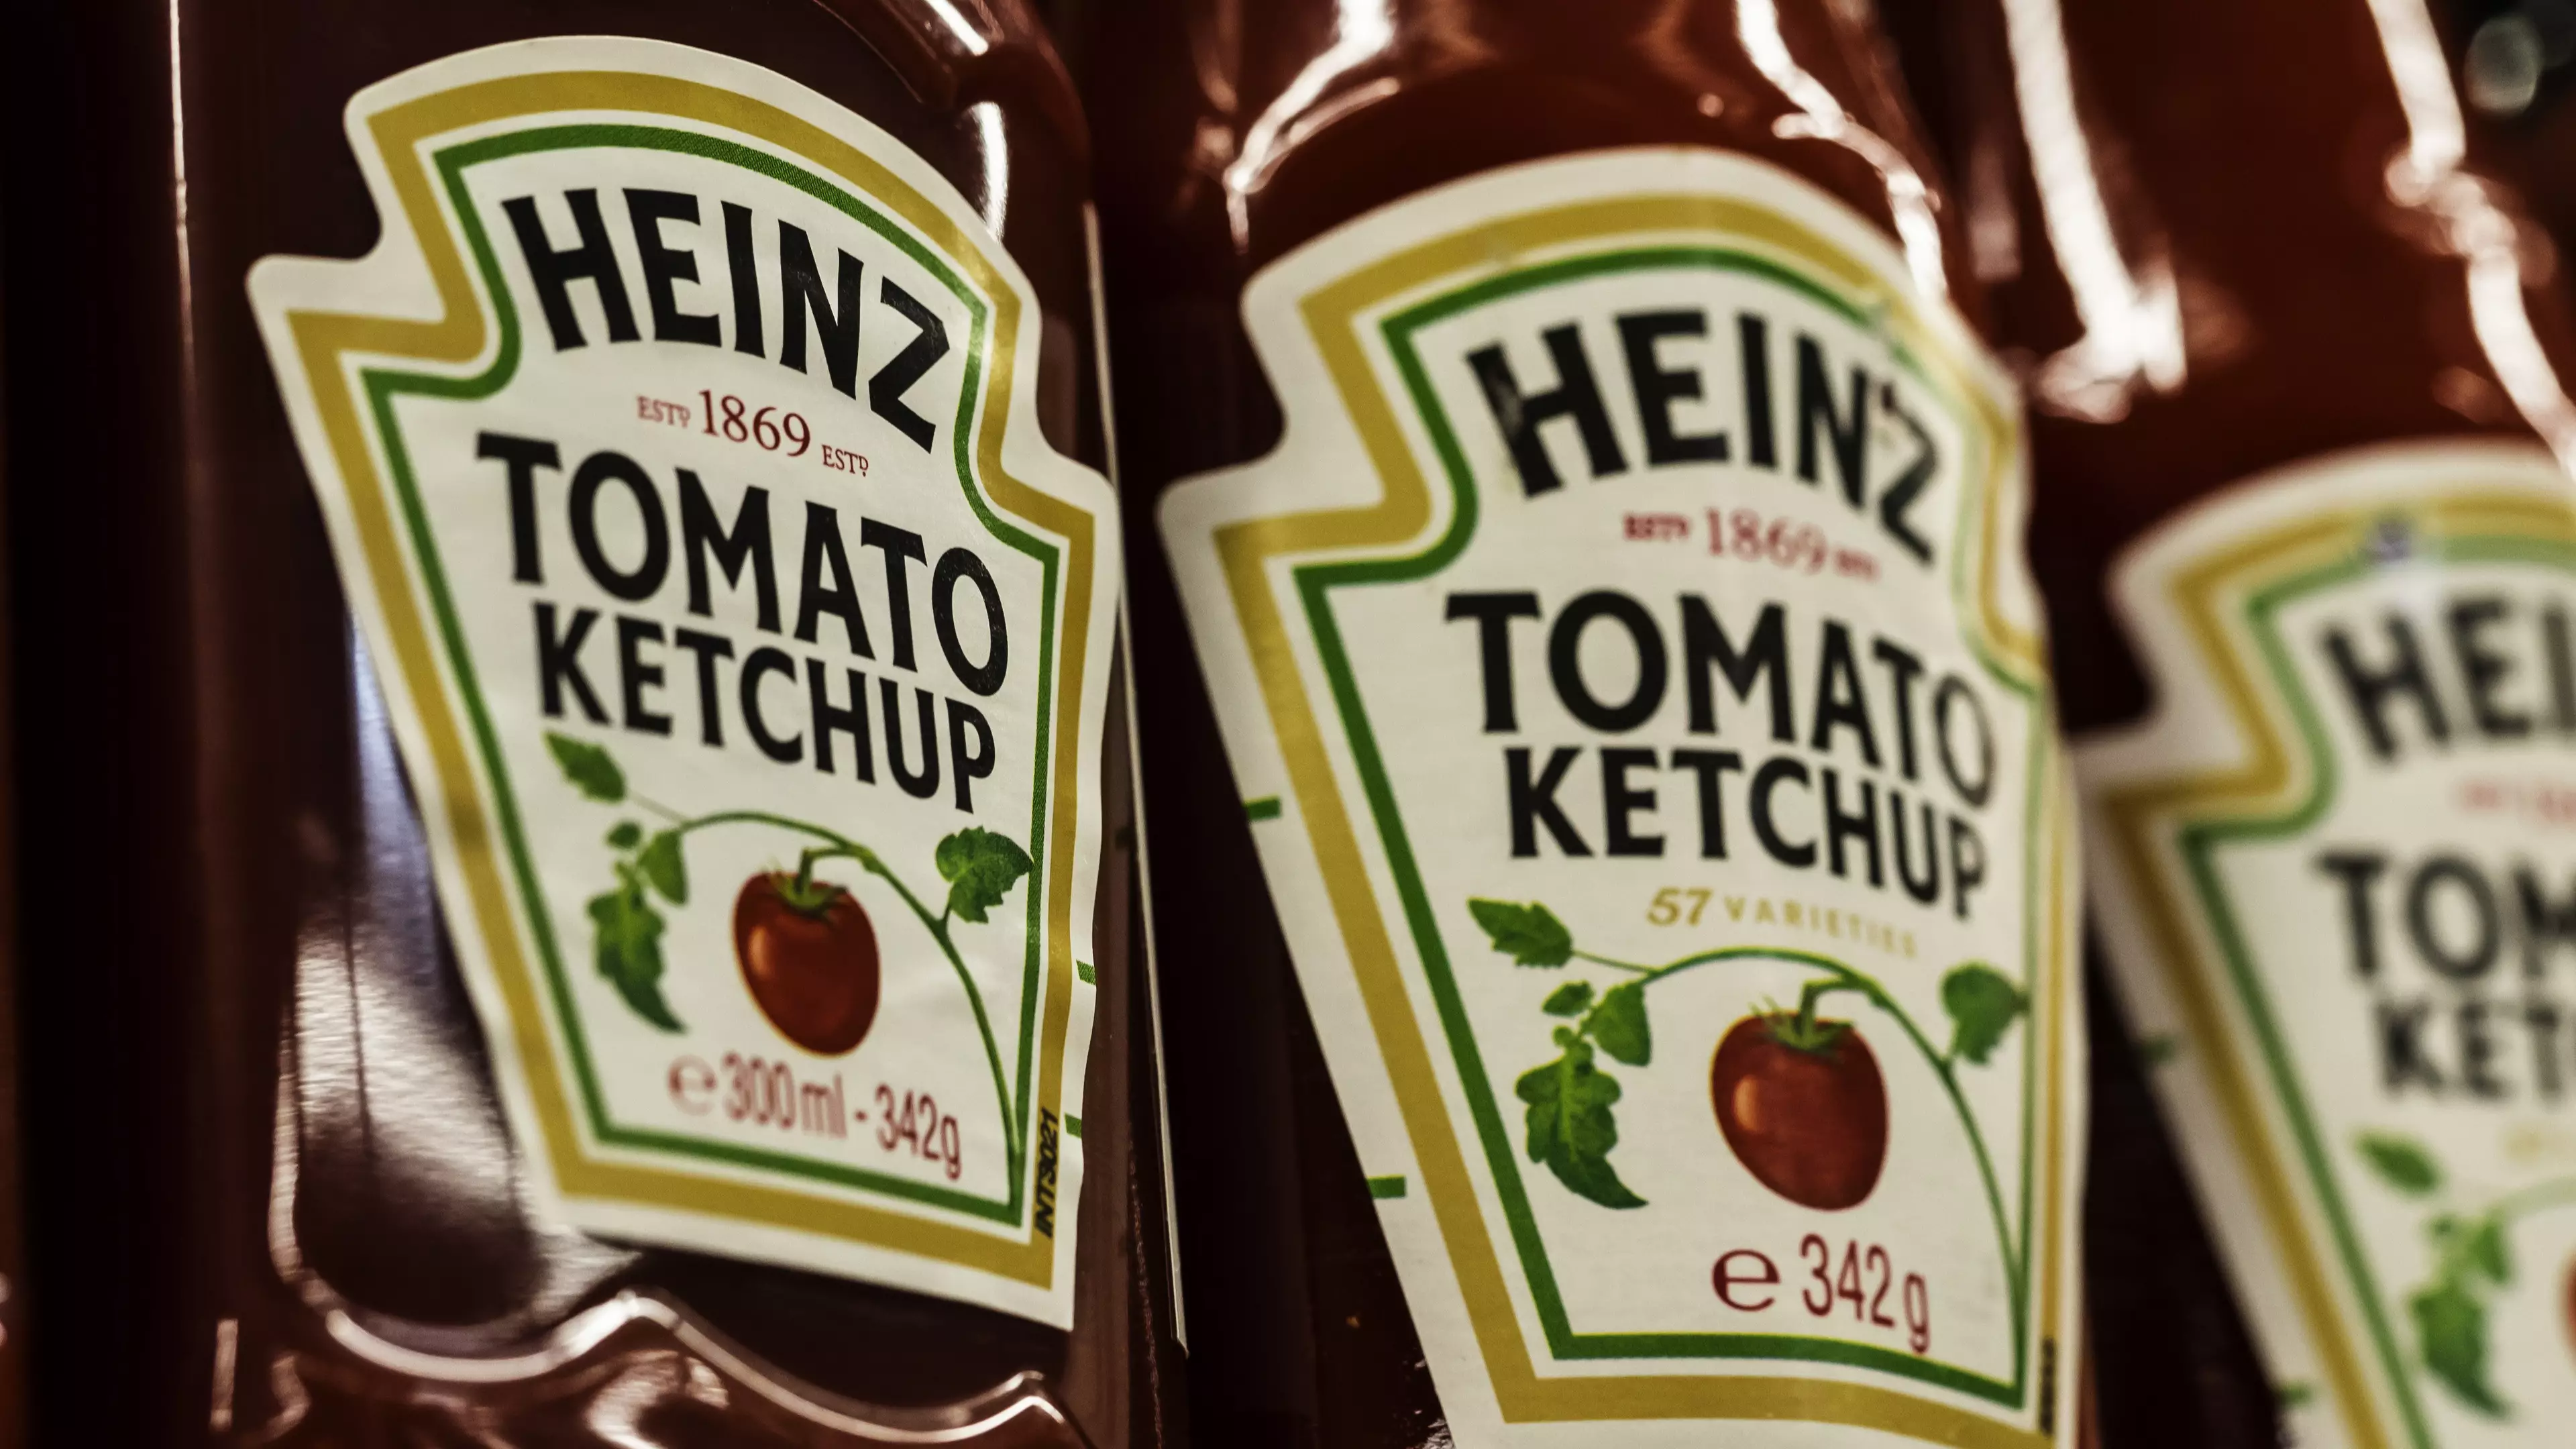 Ketchup Doesn't Need To Be Stored In Fridge, Consumer Watchdog Advises 